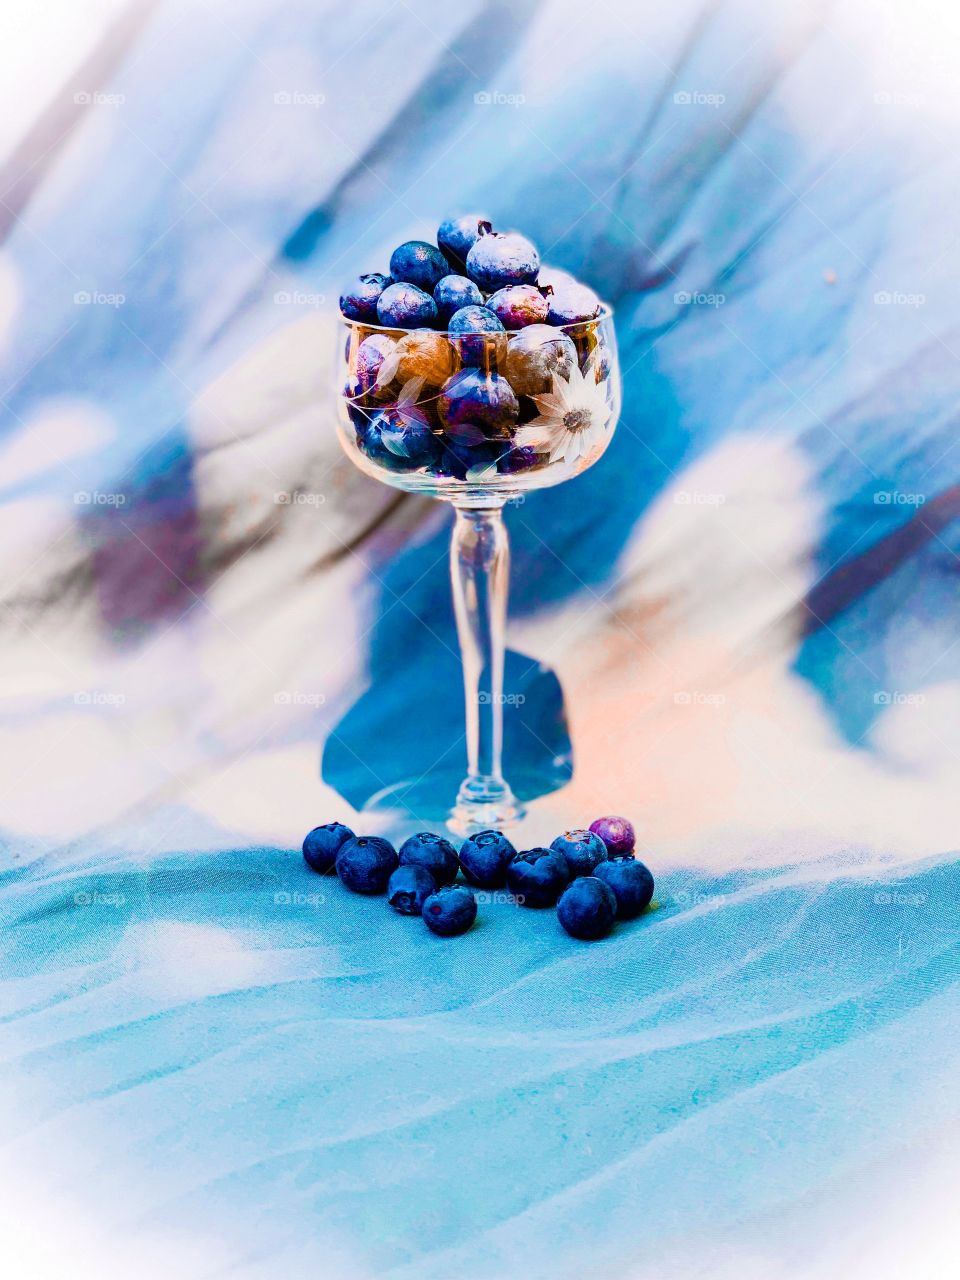 Ripe blueberries sitting in an antique crystal goblet. A lovely and appetizing sign of summer treats to come.